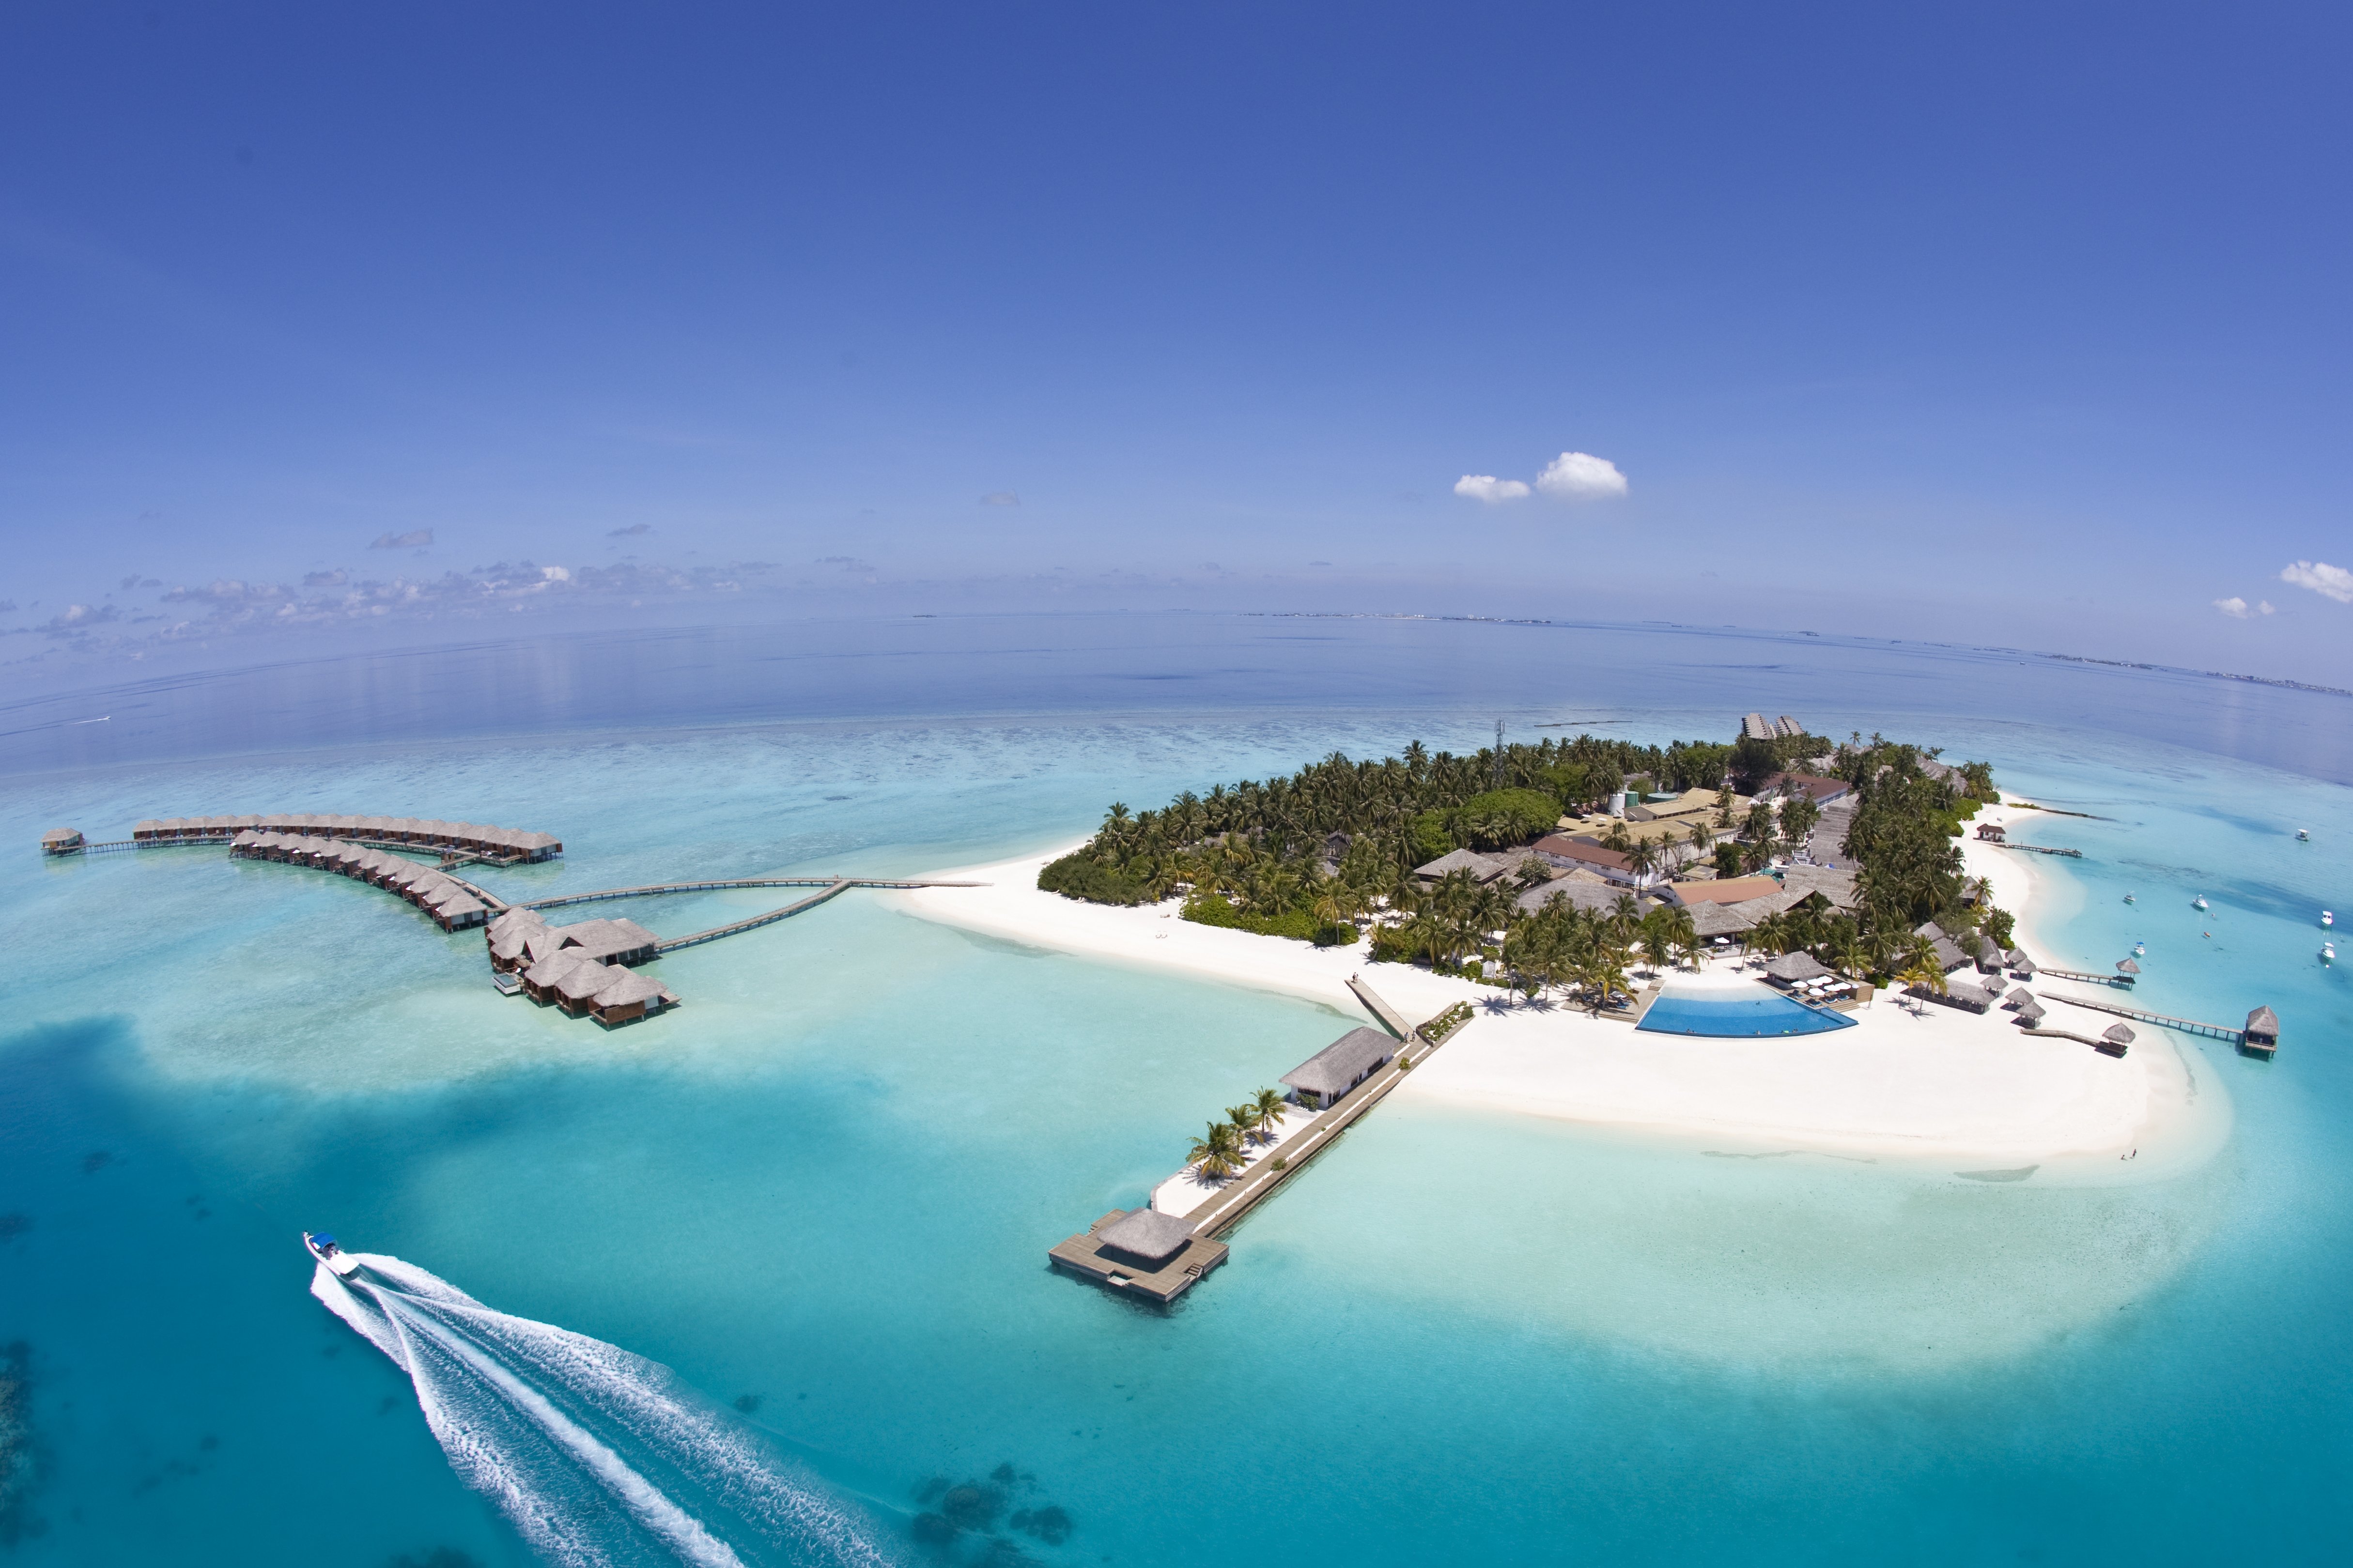 maldives, paradise, blue water, nature, land, height, relaxation, rest, island, resort, seychelles, relax